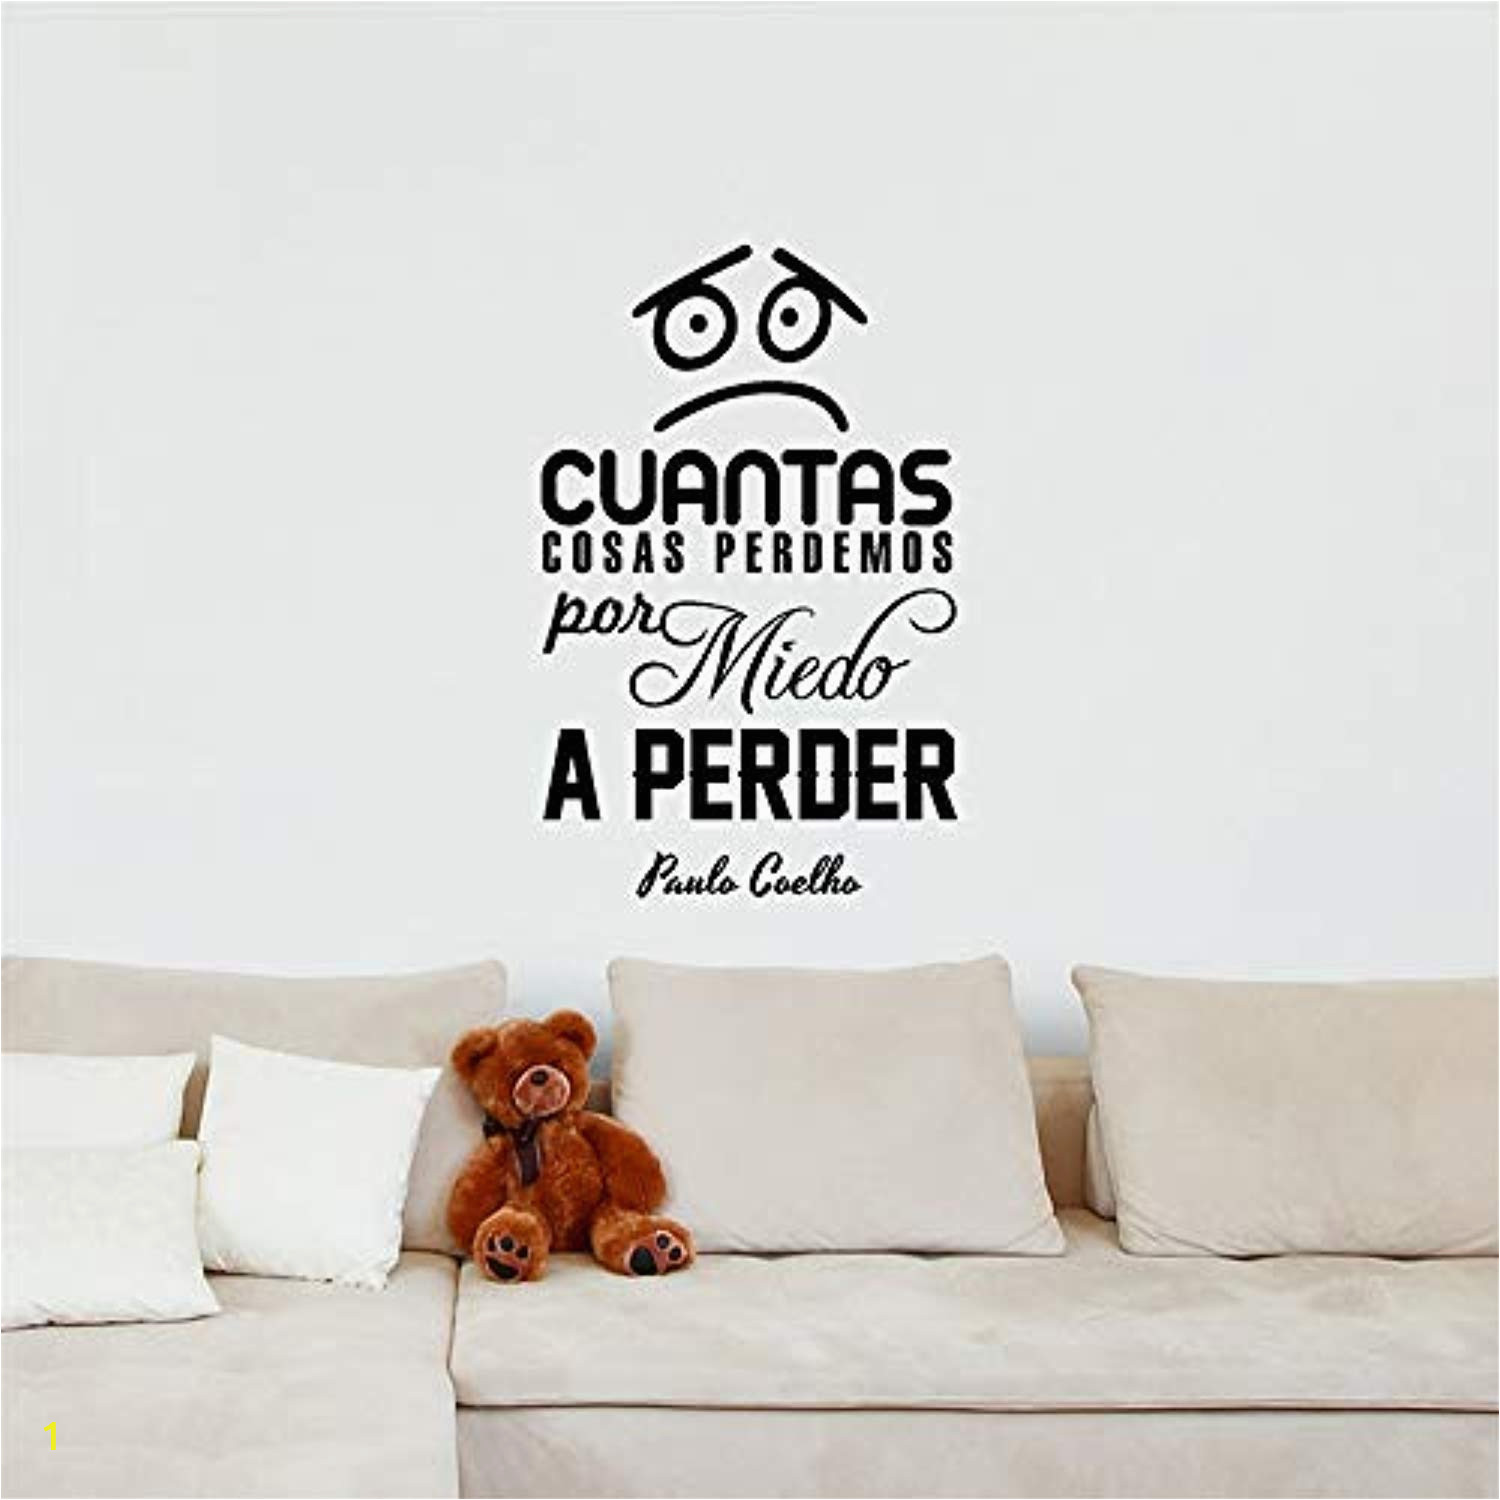 Sports Wall Mural Decals Amazon Peel and Stick Mural Spanish Quote Cuántas Cosas